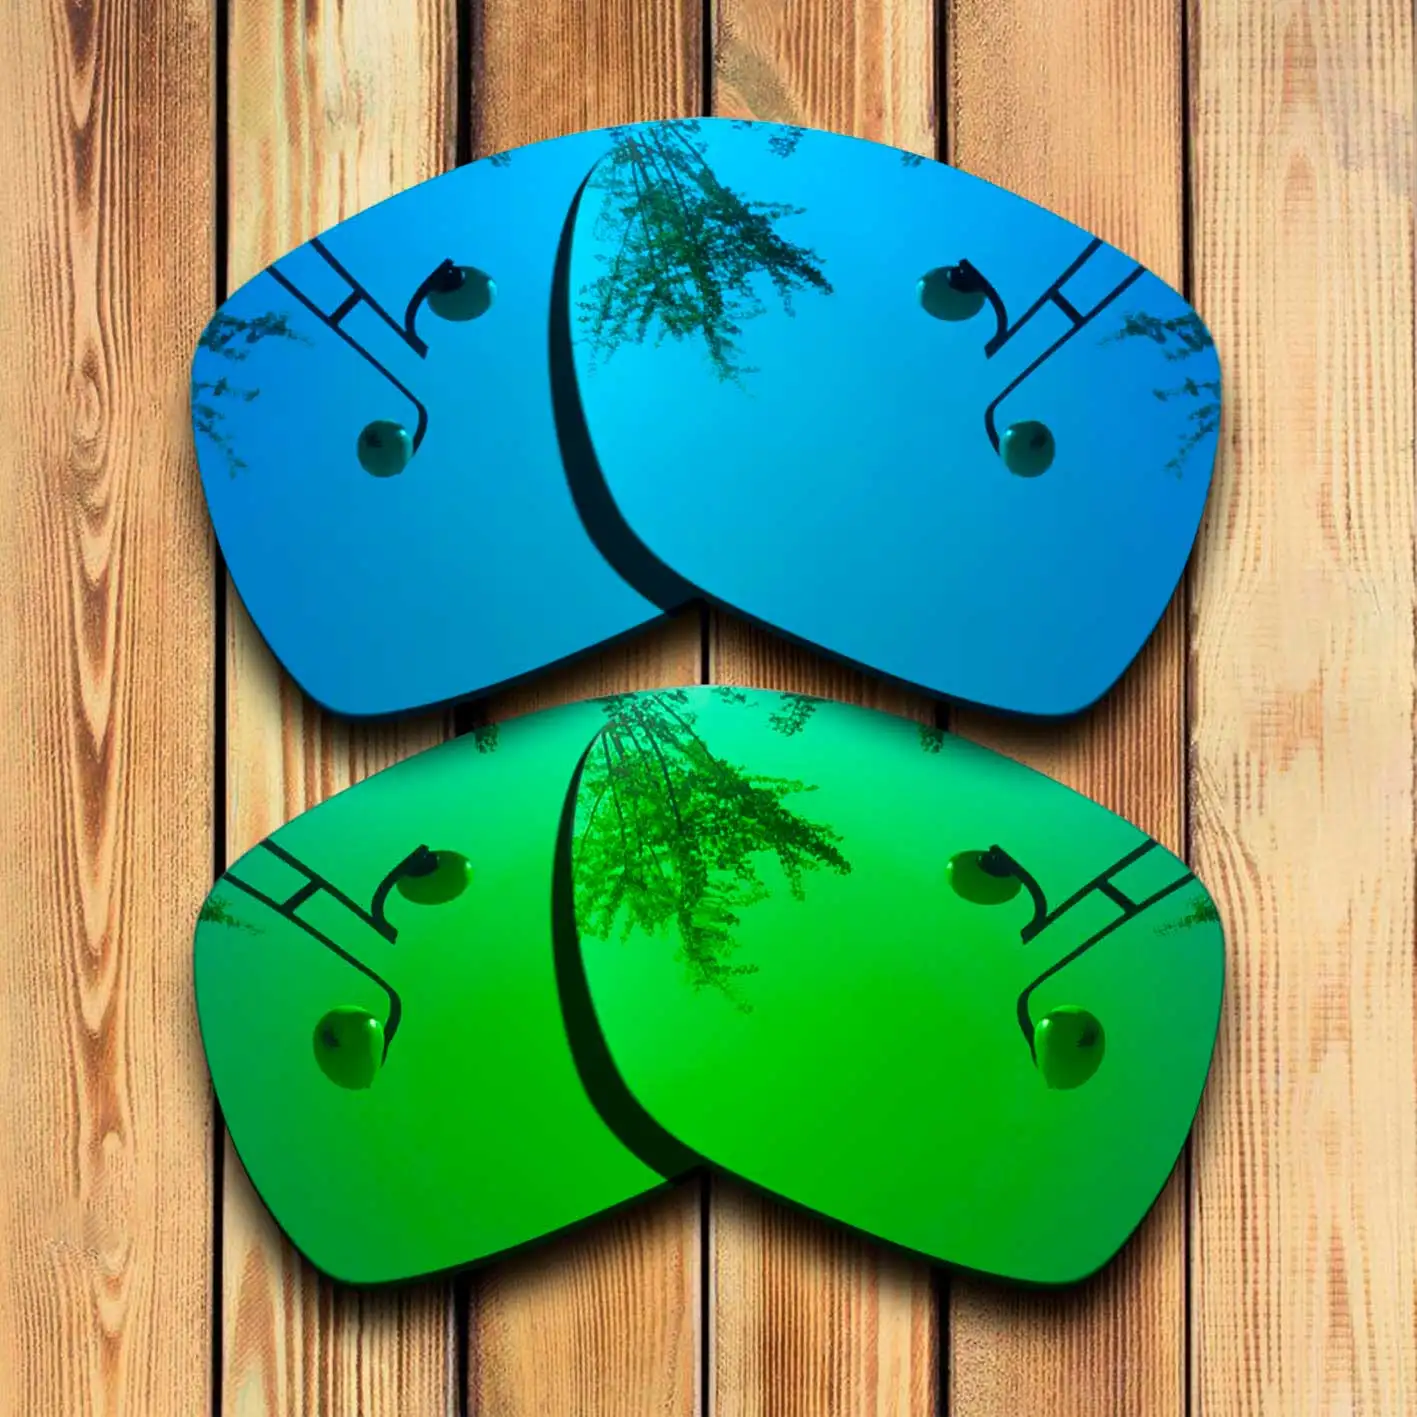 

100% Precisely Cut Polarized Replacement Lenses for Deviation Sunglasses Blue& Green Combine Options